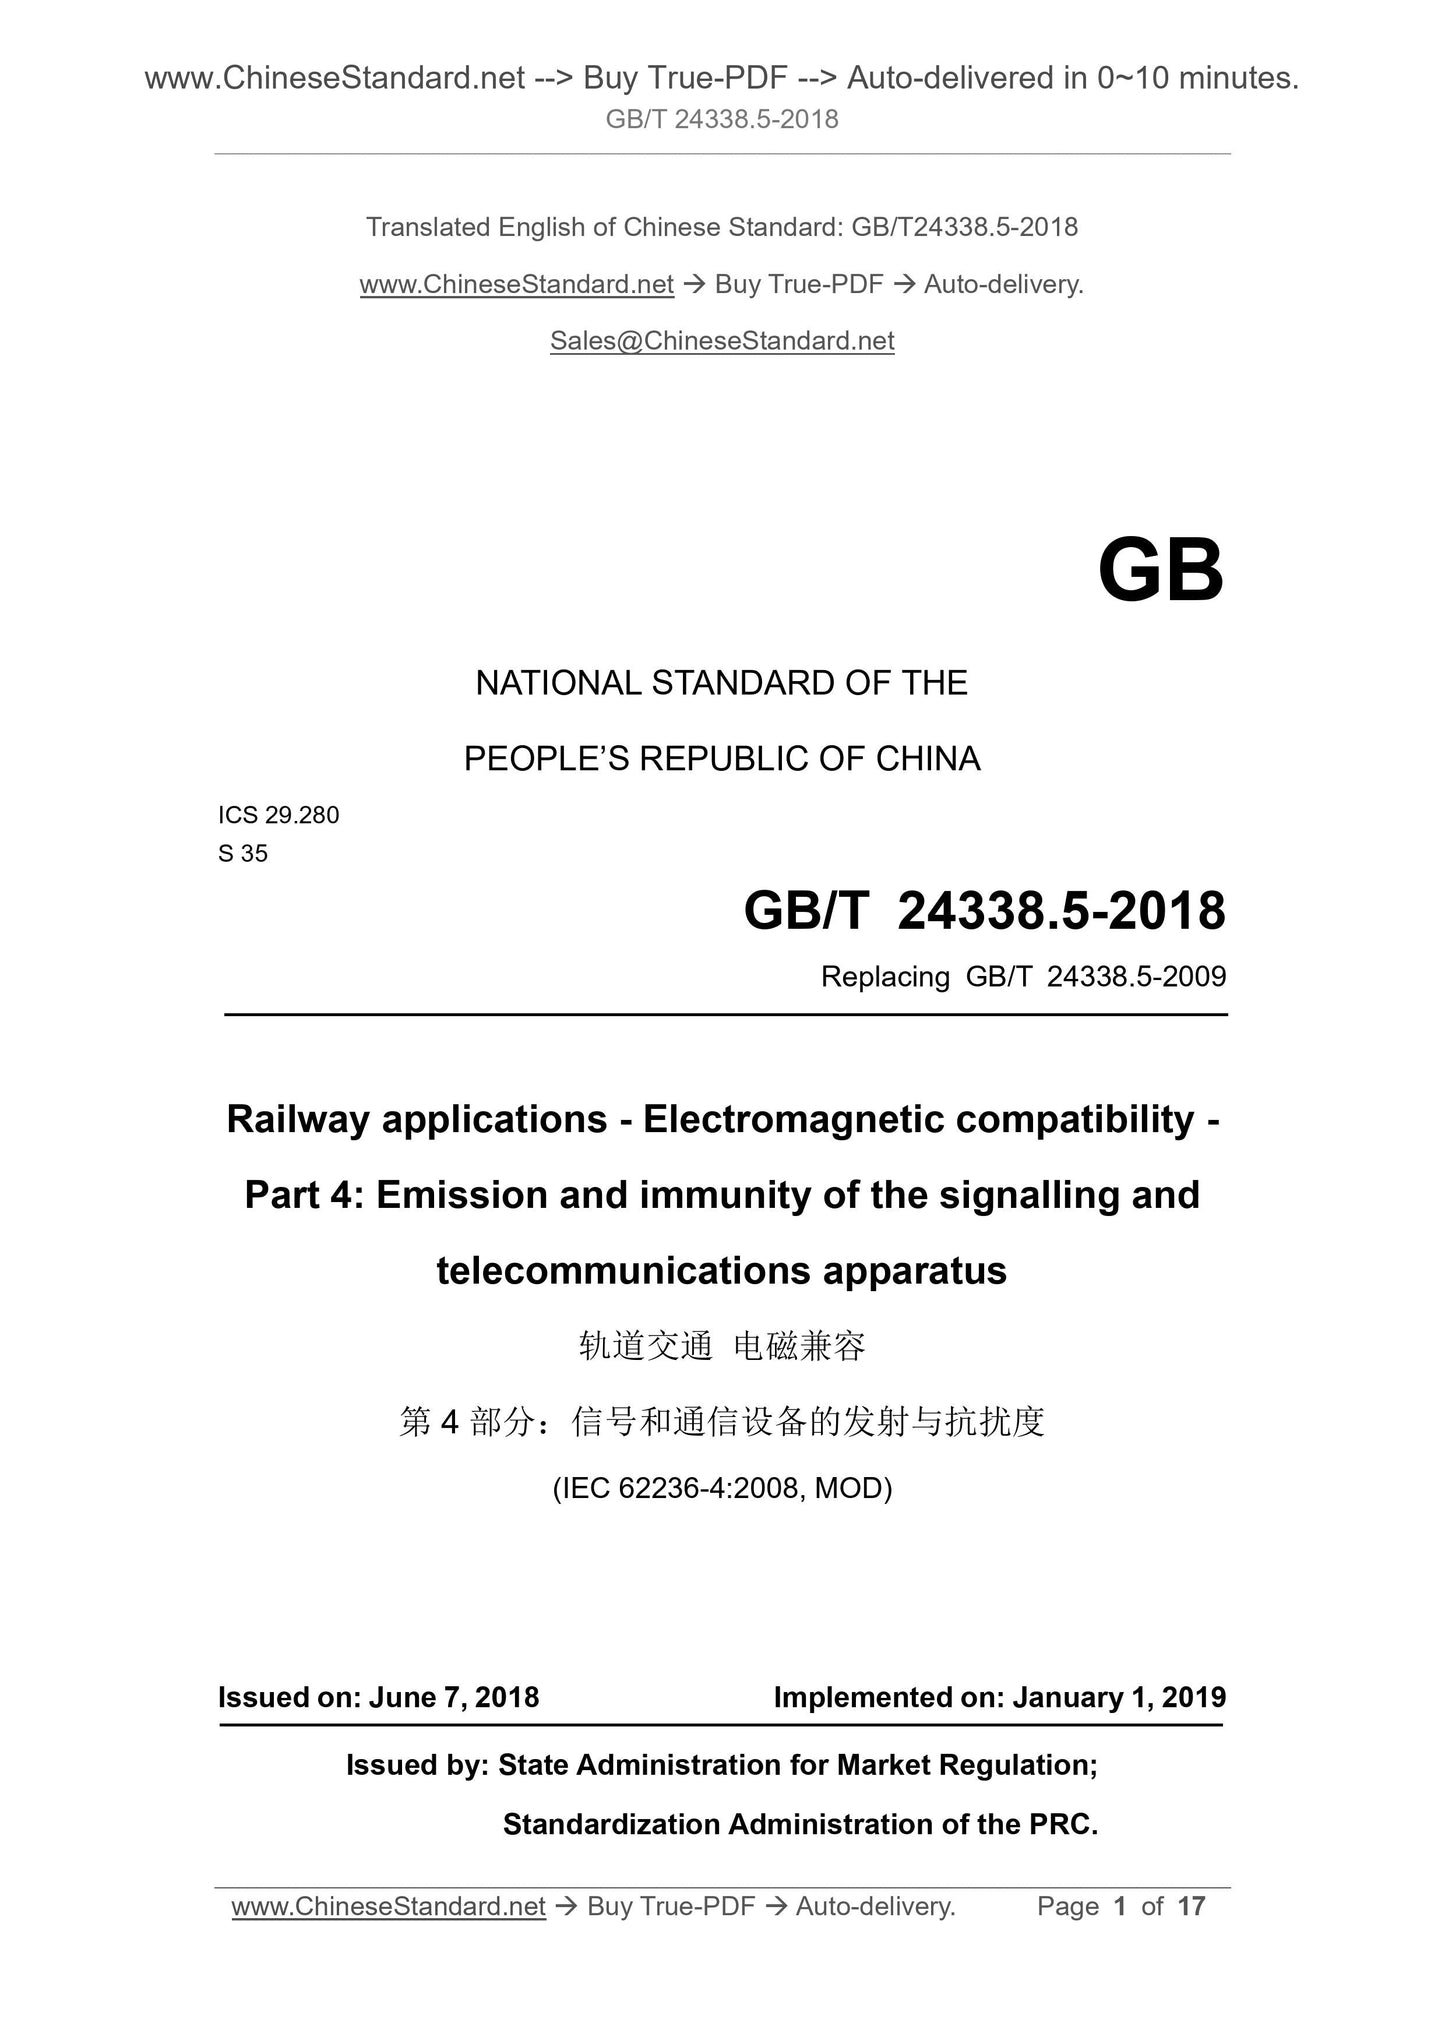 GB/T 24338.5-2018 Page 1